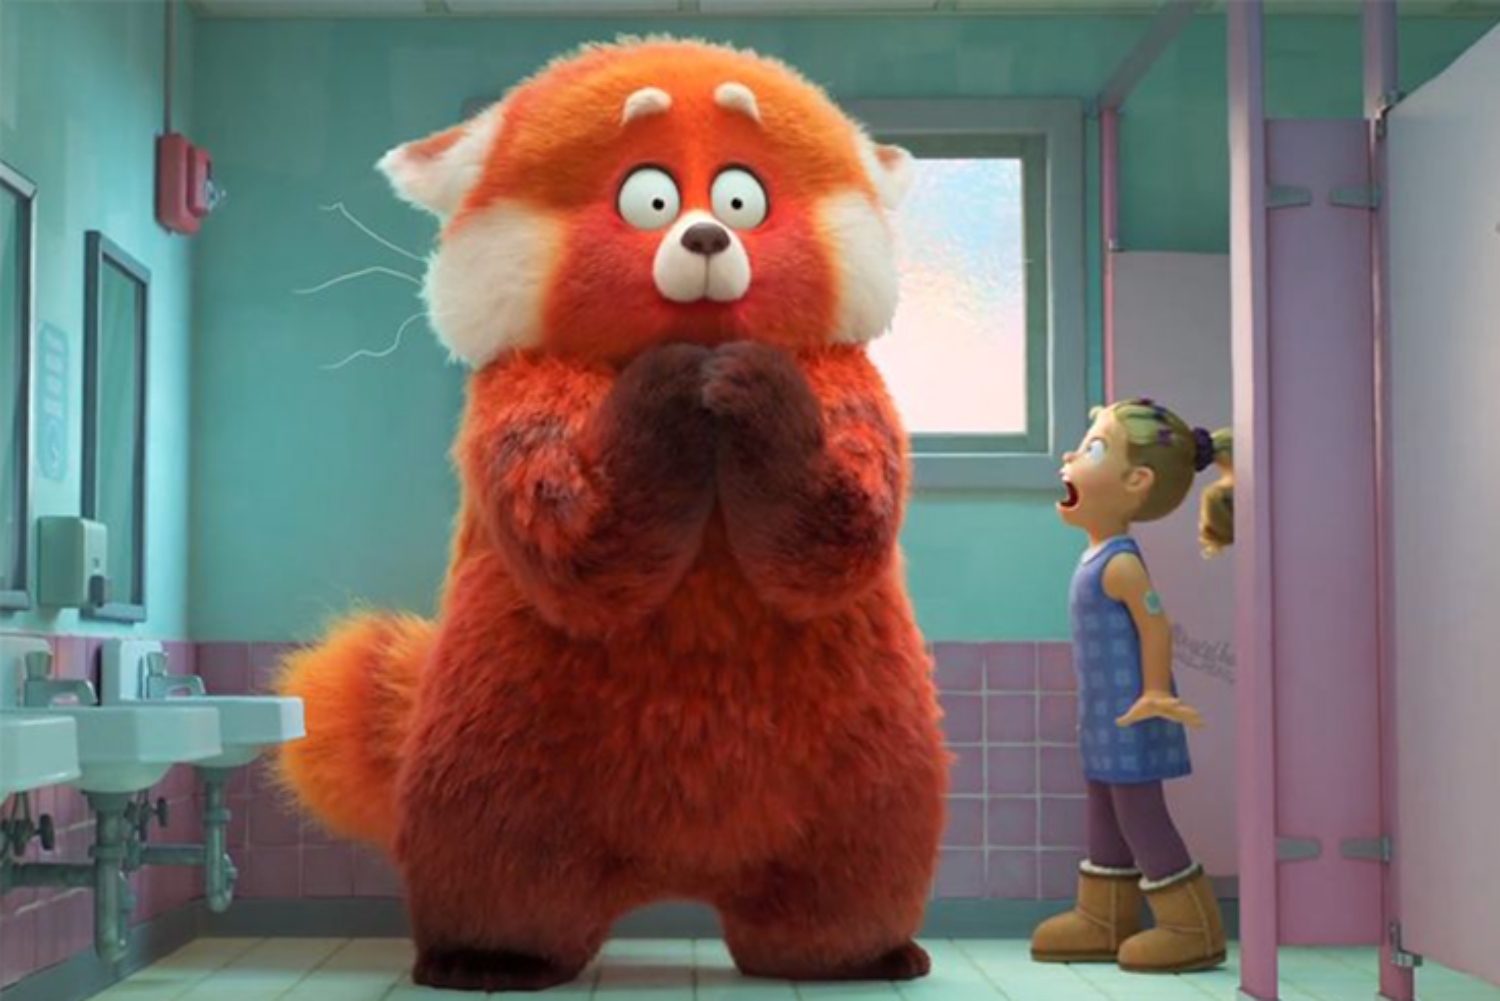 A scene from Disney/Pixar's "Turning Red" shows the main character transformed into a giant red panda in a school bathroom